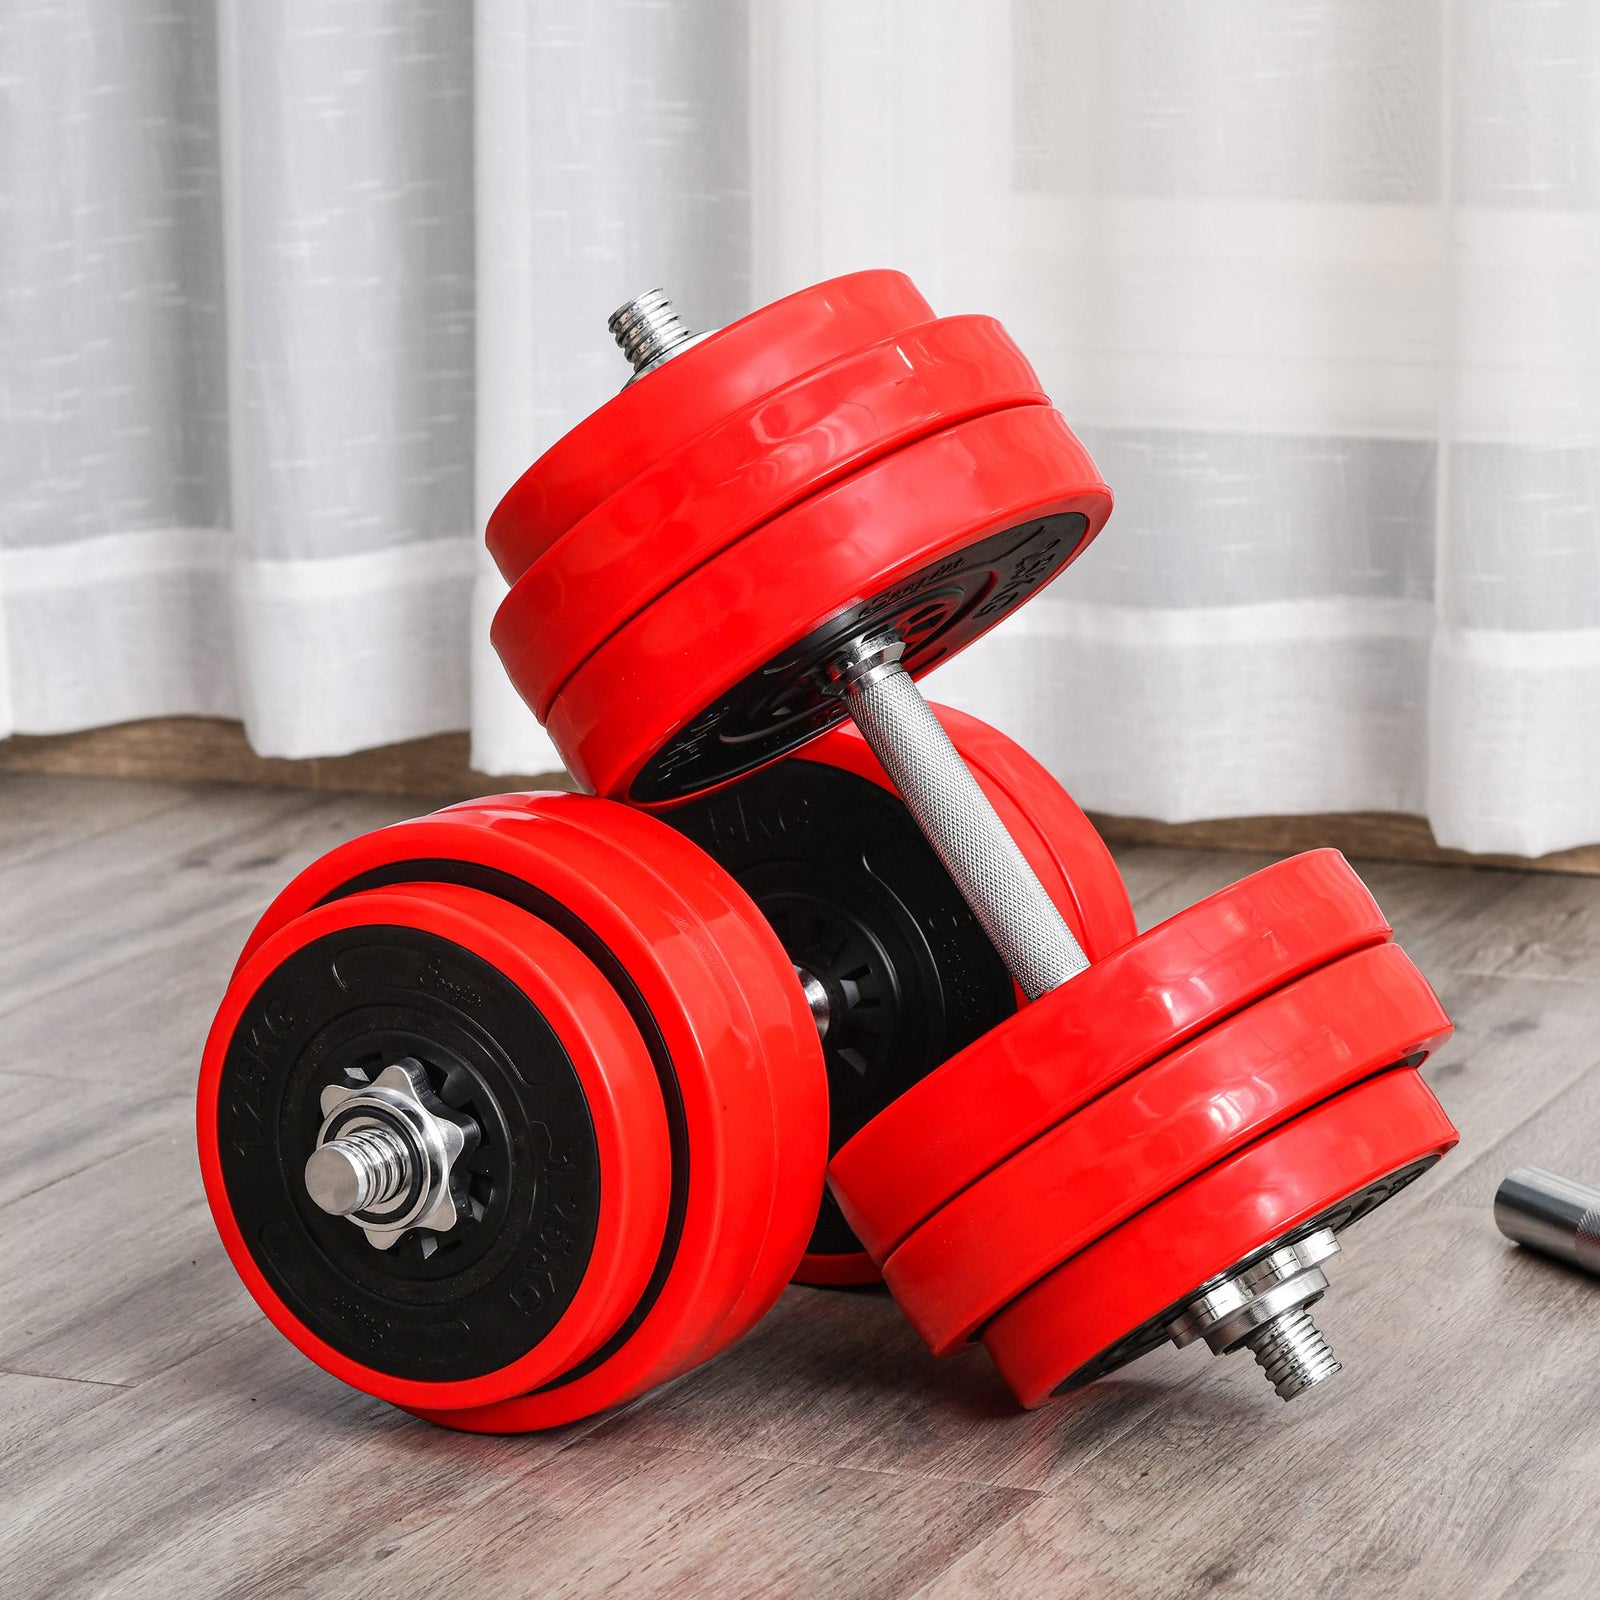 Soozier 66lbs Two-In-One Dumbbell & Barbell Adjustable Set Strength